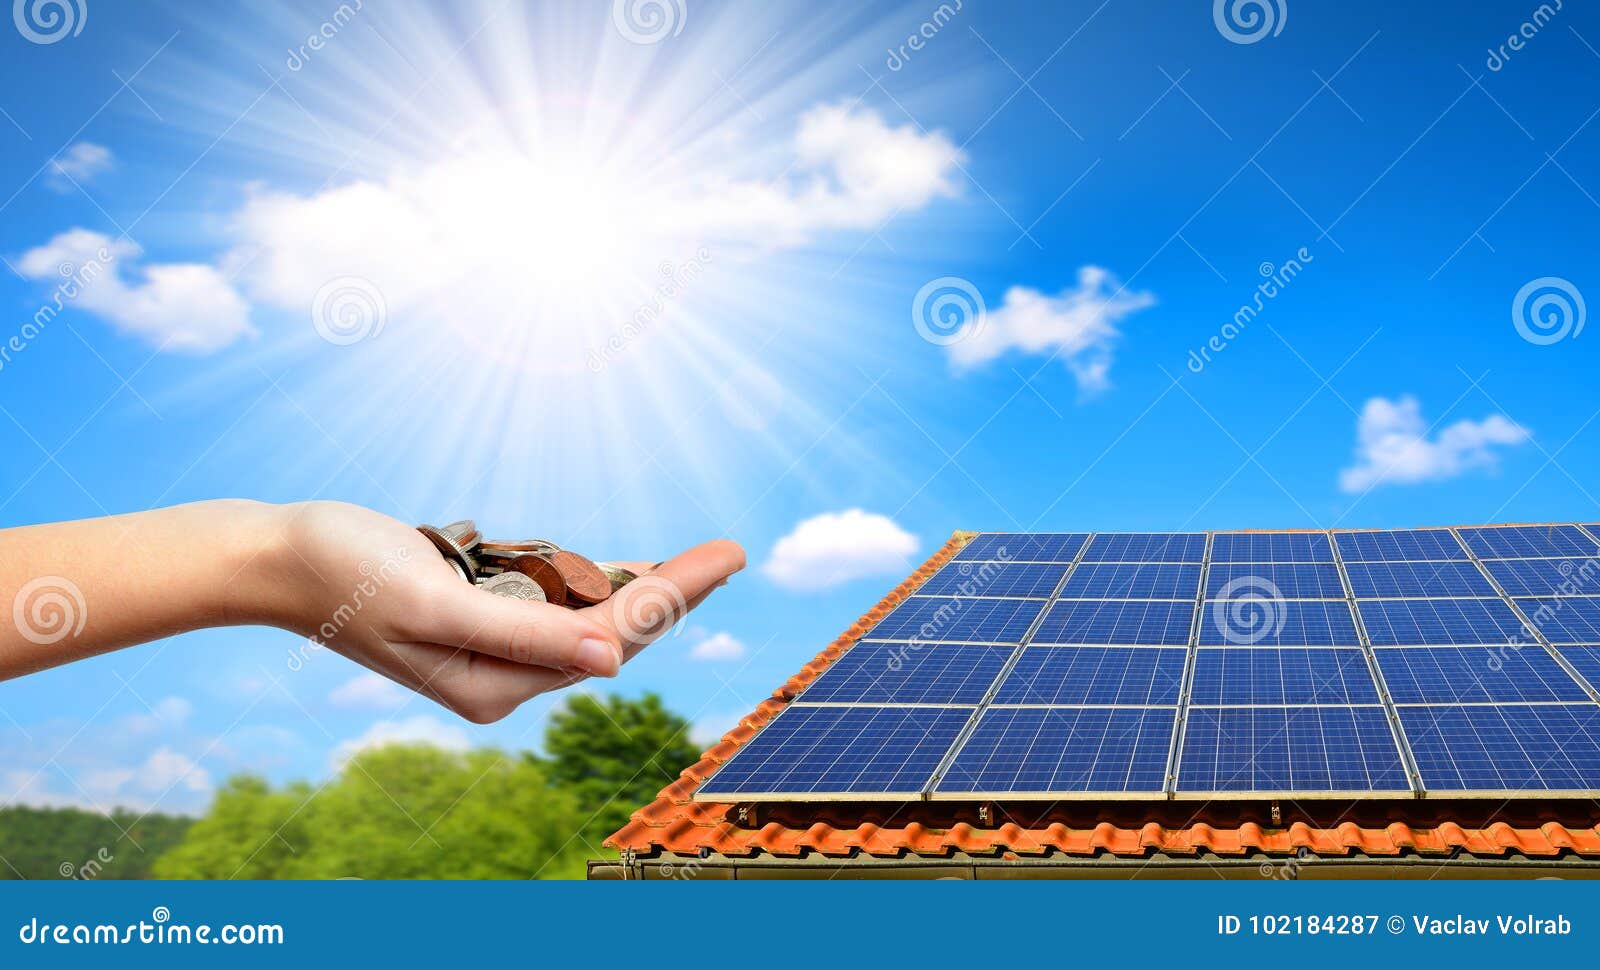 solar panel on the roof of the house and coins in hand.